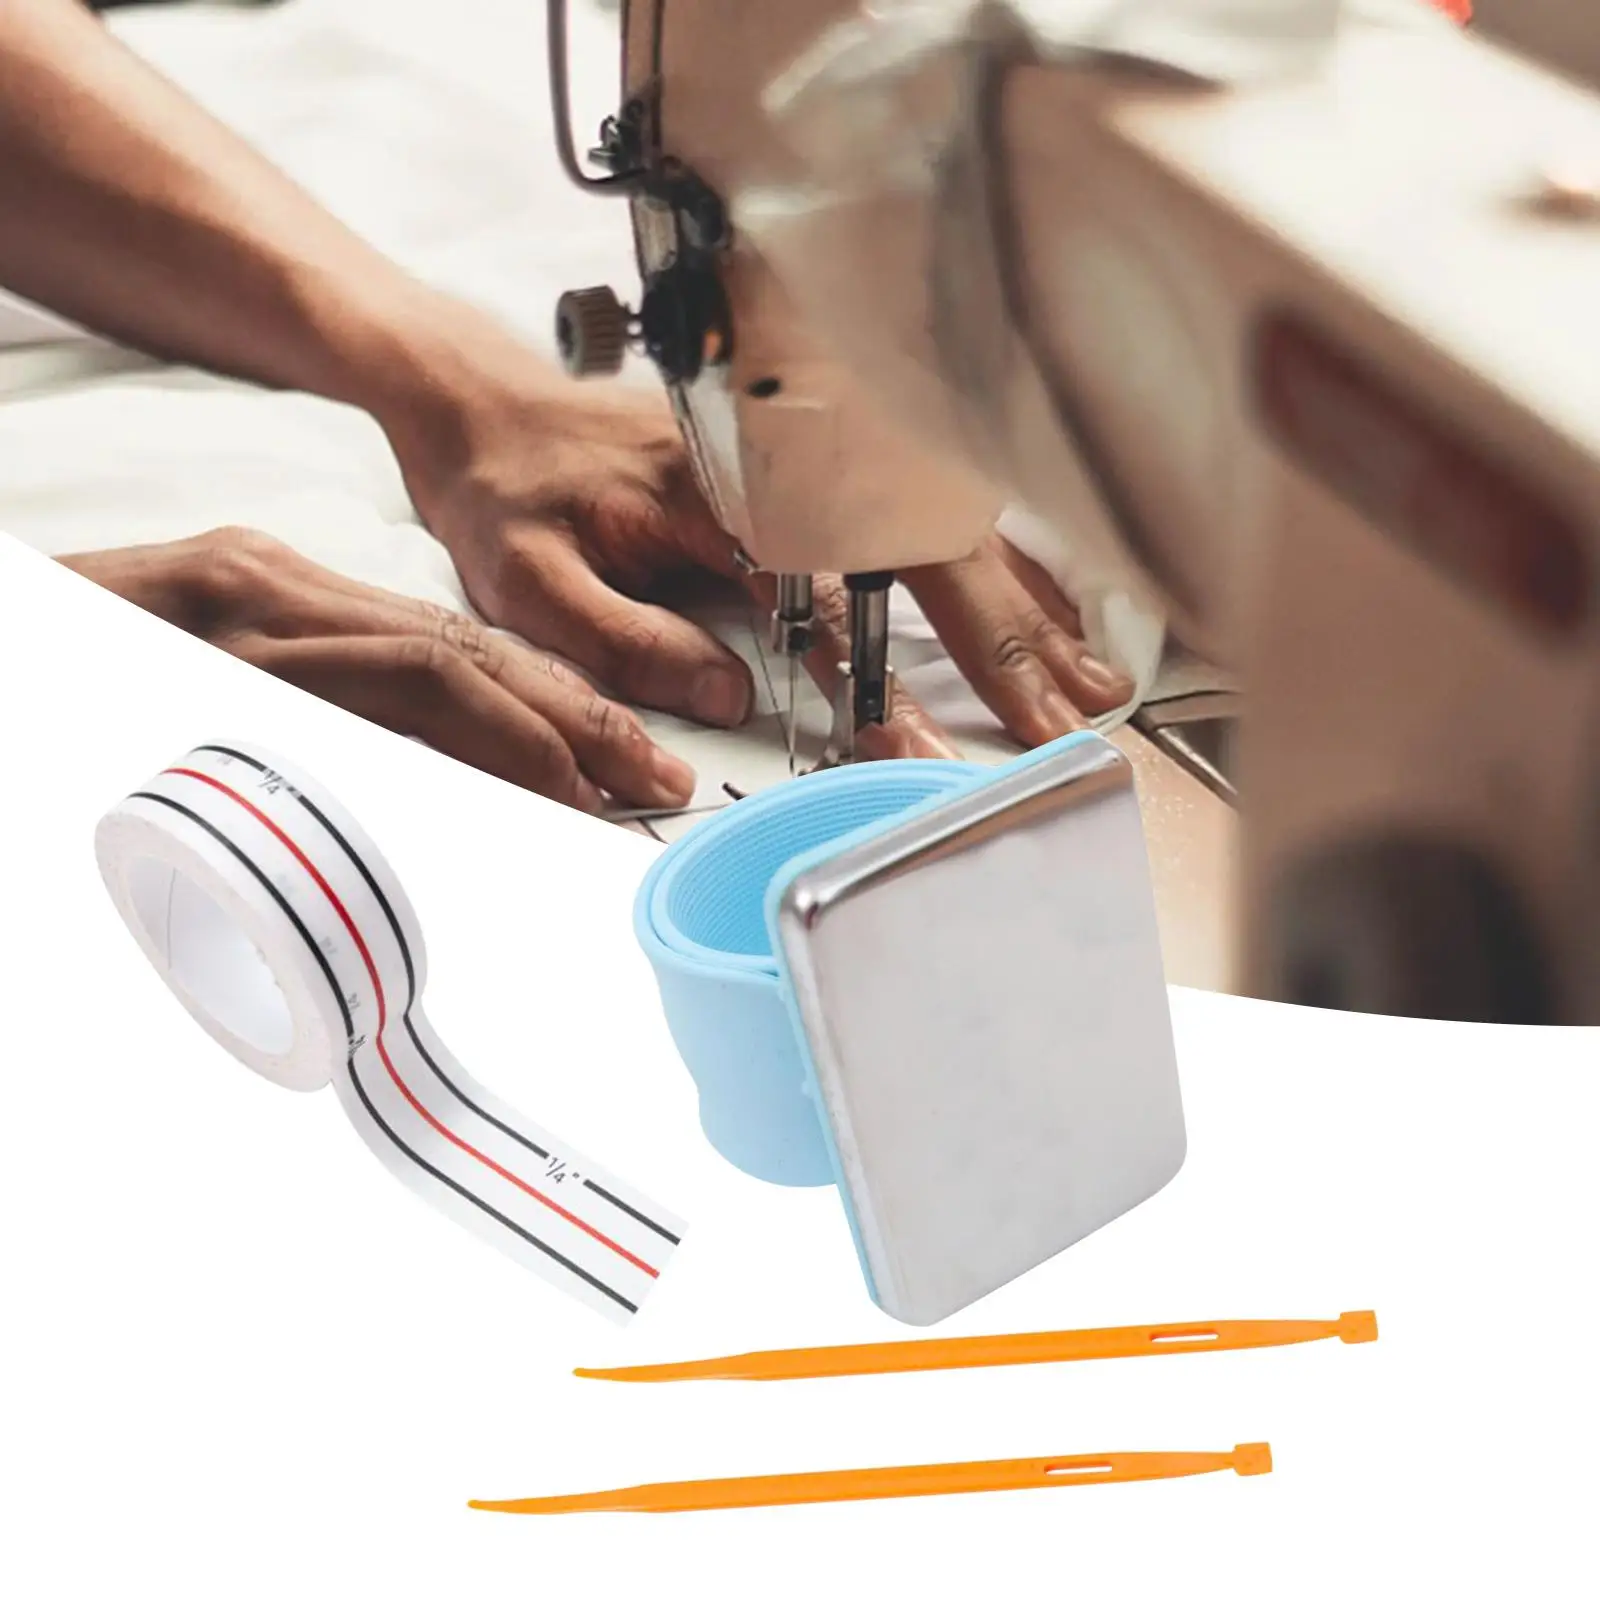 Magnetic Wrist Sewing Pincushion Needle Cushion for Embroidery Barber Sewing